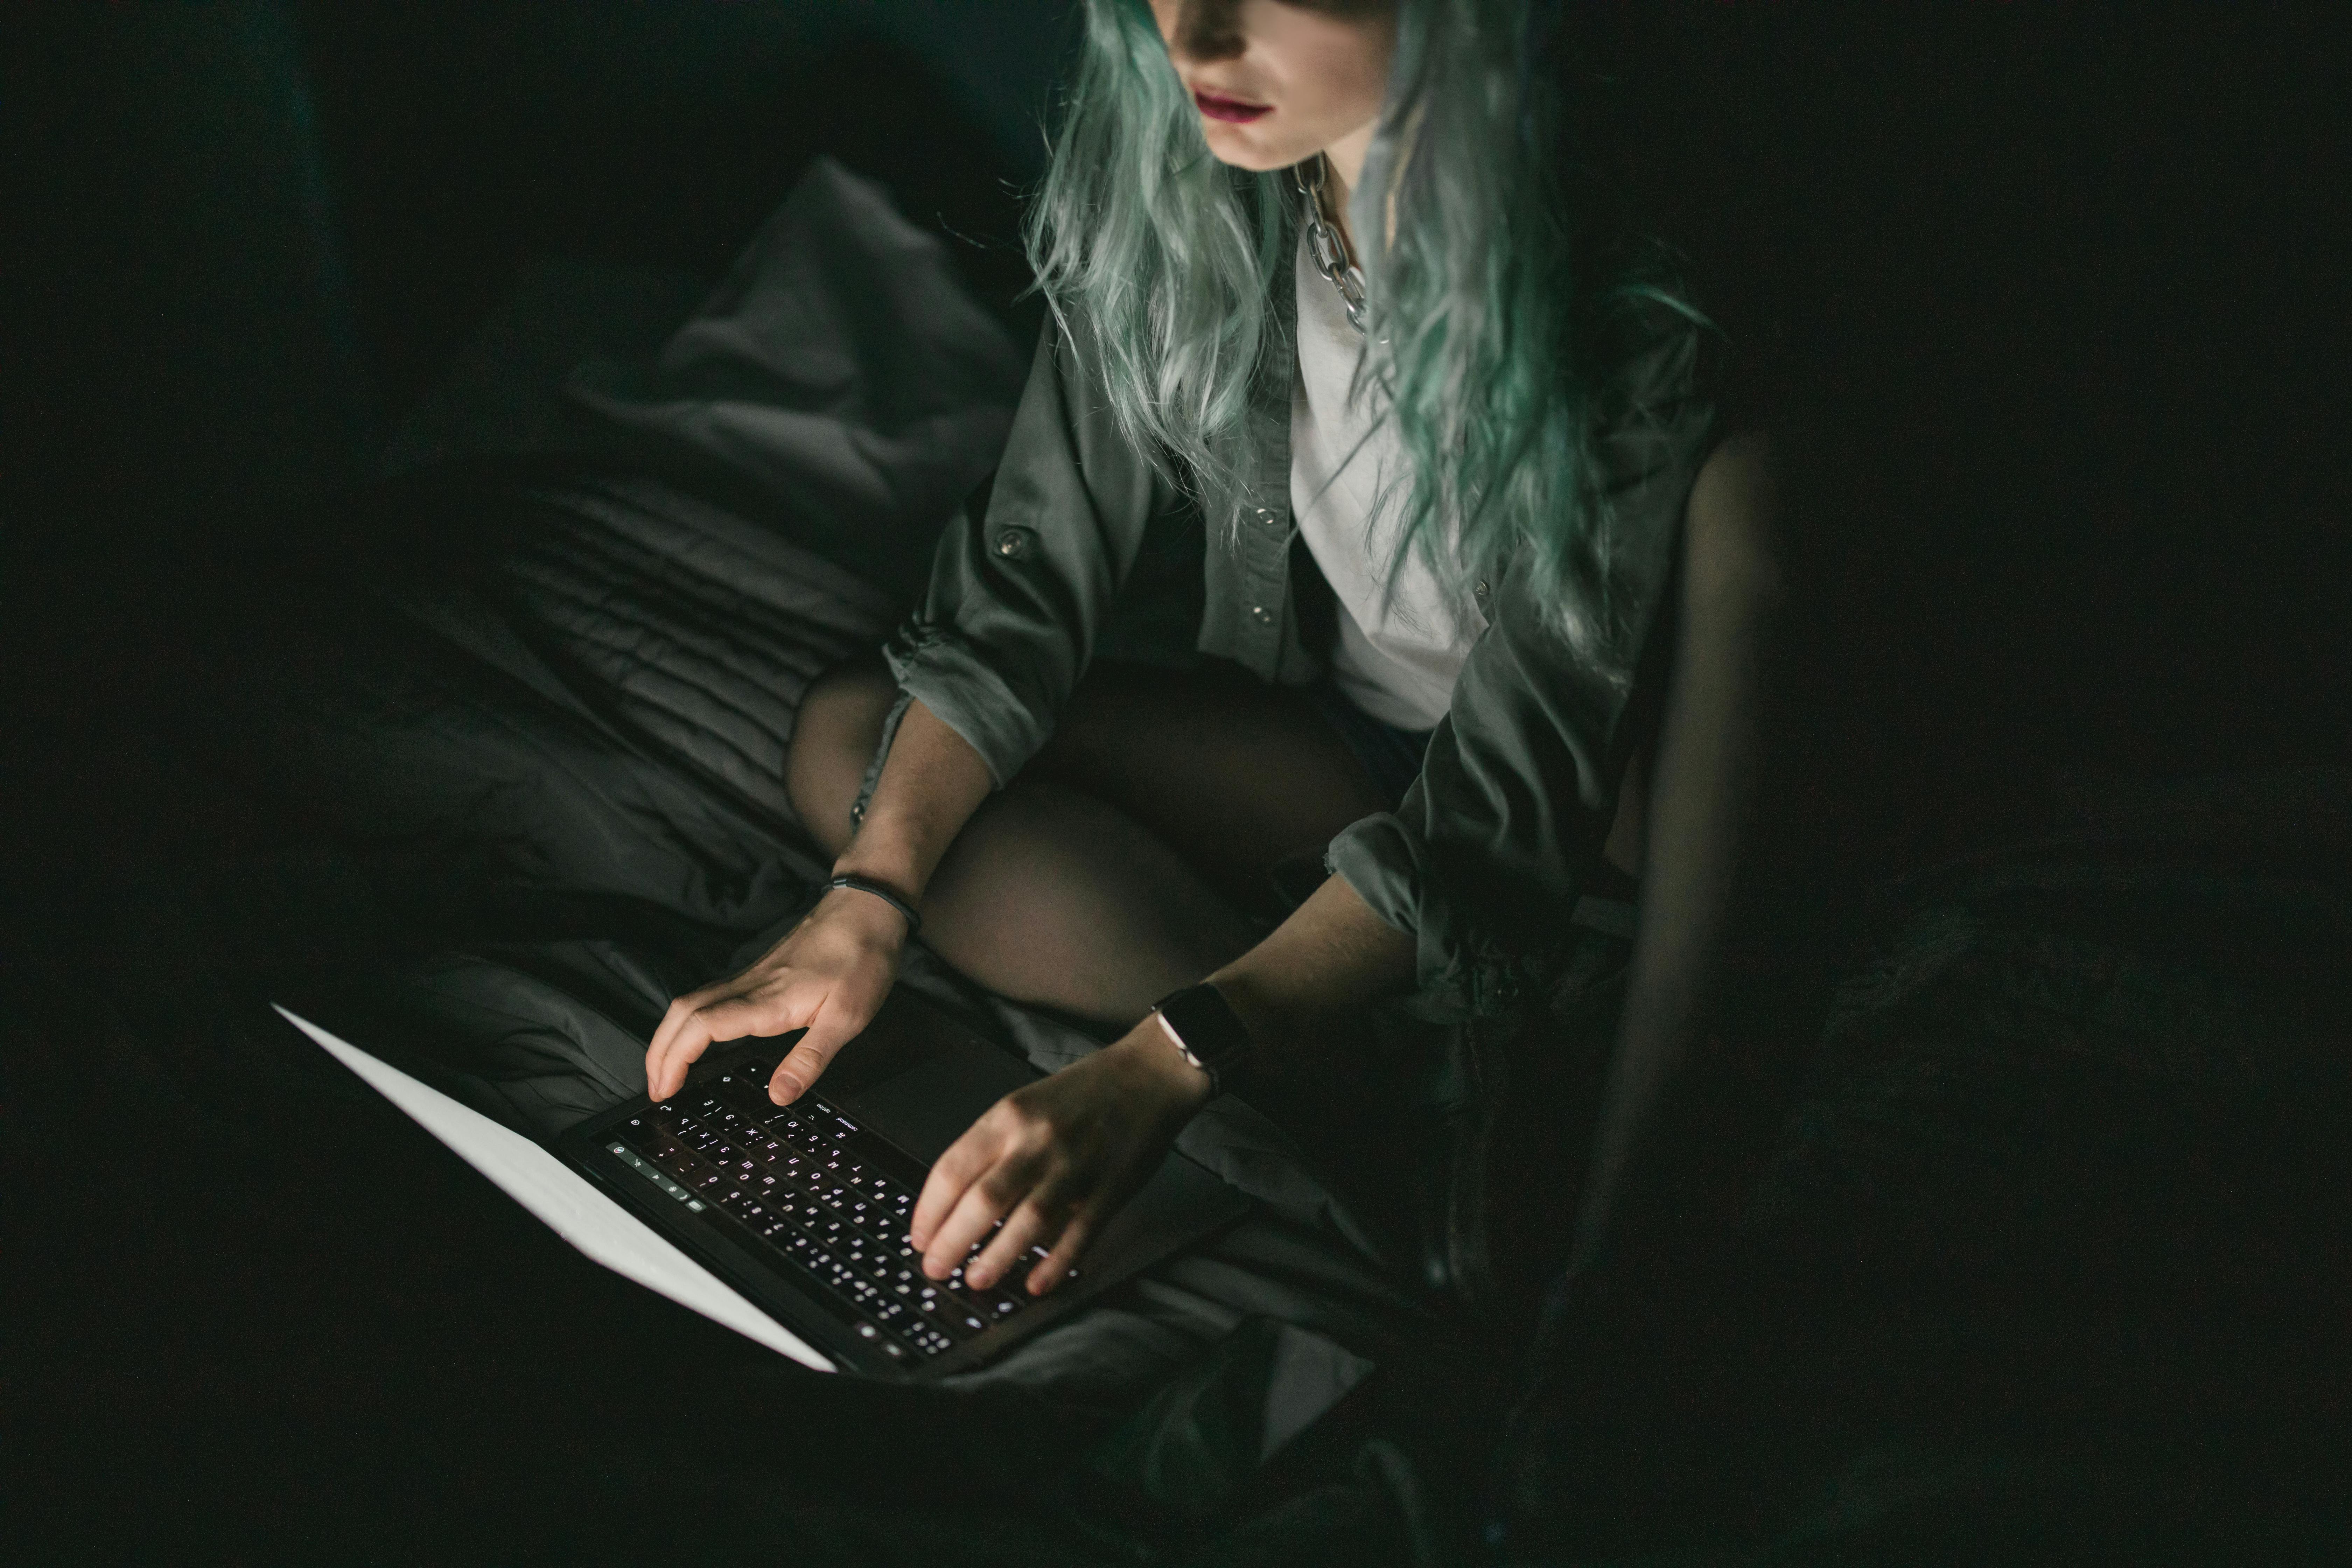 A woman using her laptop at night | Source: Pexels